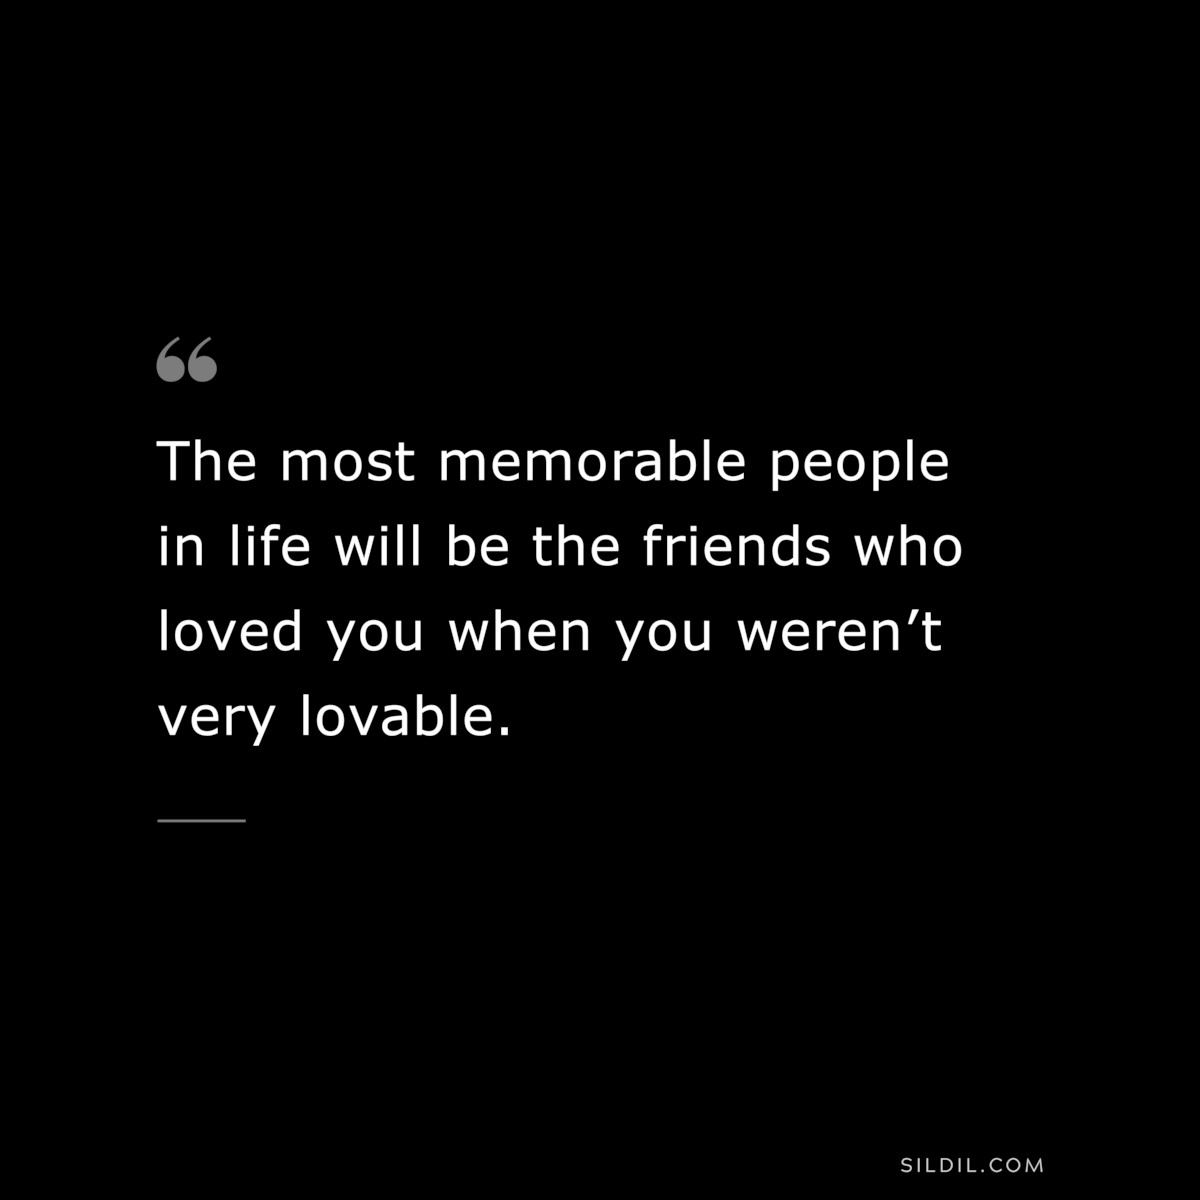 The most memorable people in life will be the friends who loved you when you weren’t very lovable.